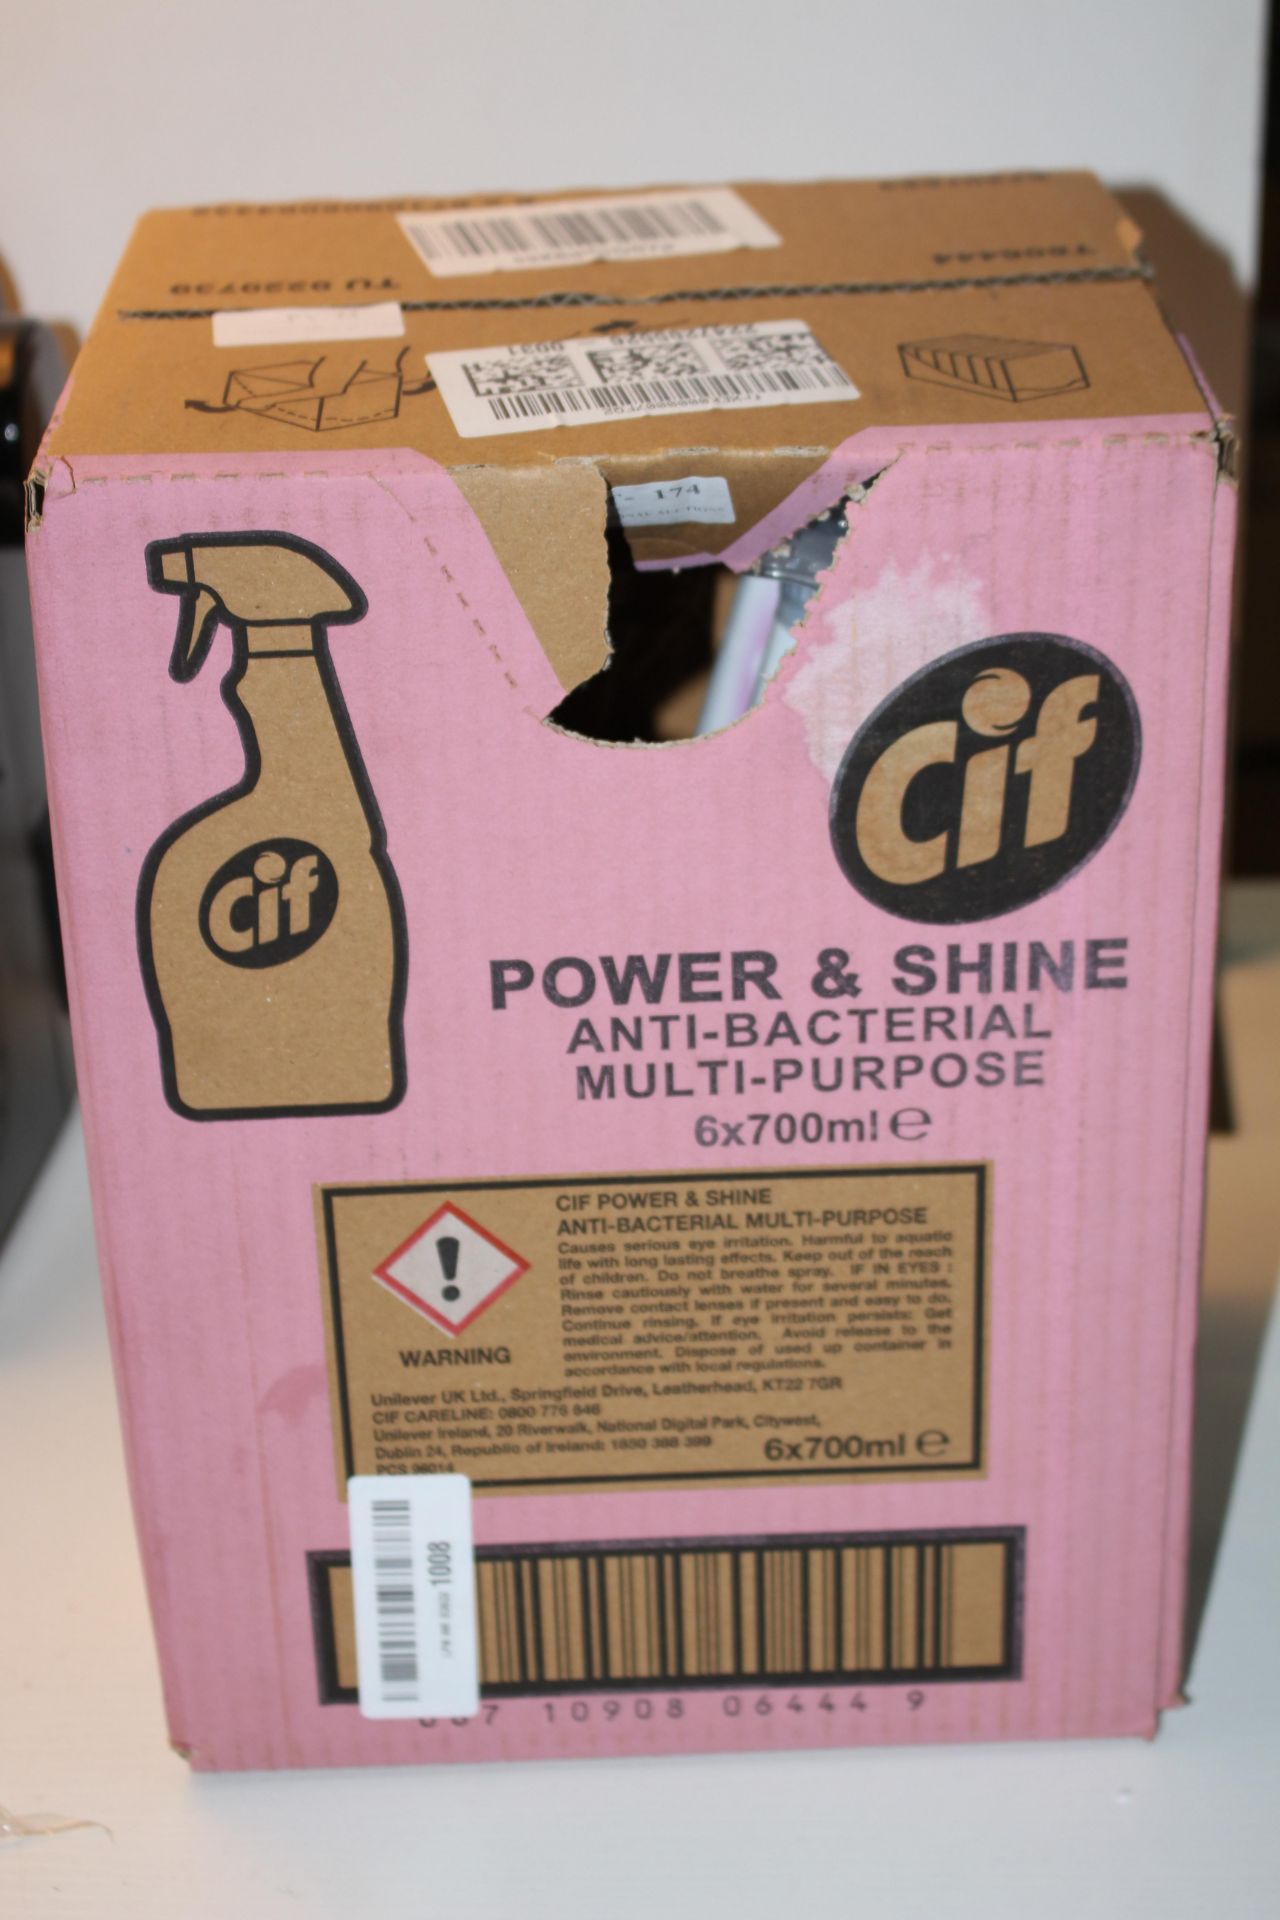 6X 700ML CIF POWER & SHINE ANTI-BACTERIAL MULTI-PURPOSE Condition ReportAppraisal Available on